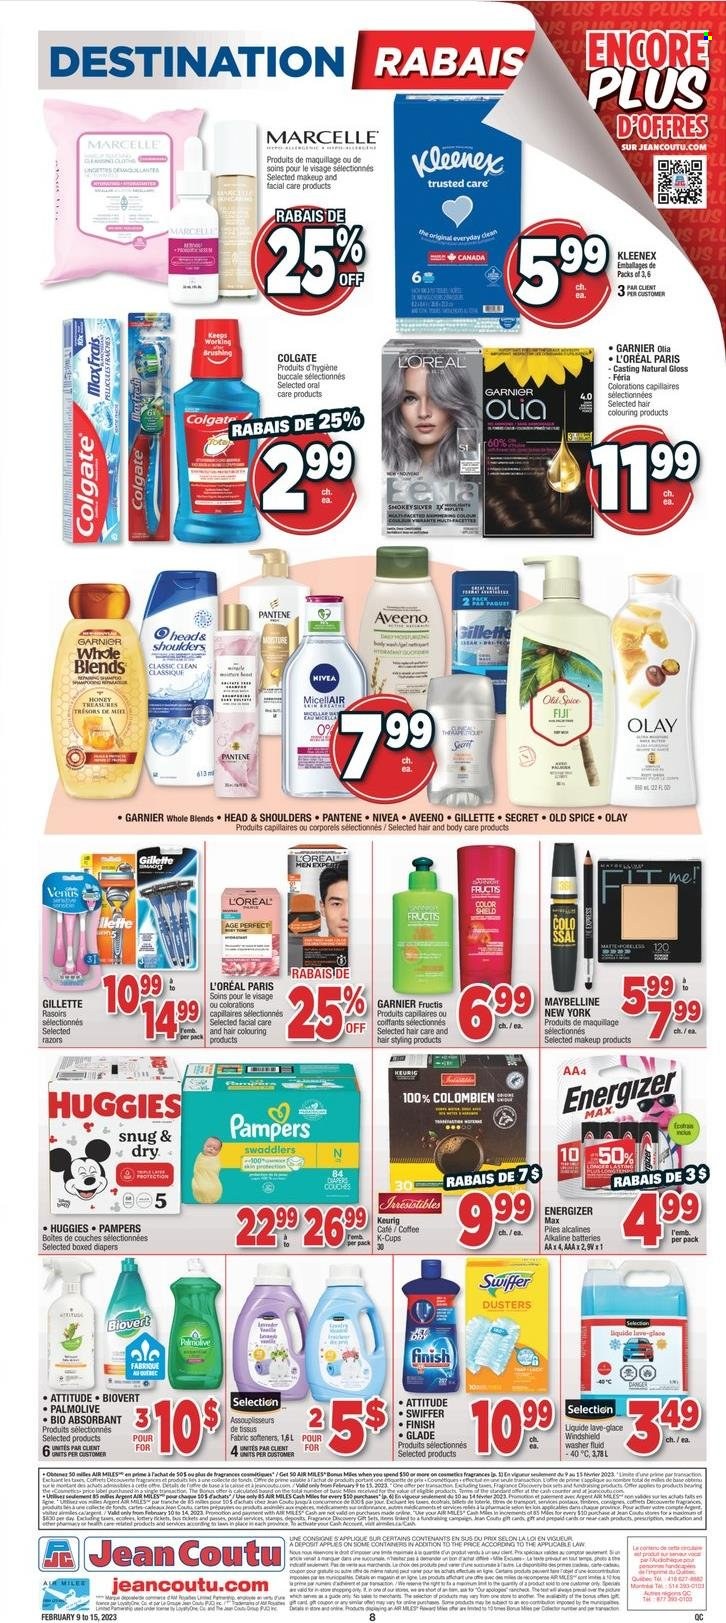 thumbnail - Jean Coutu Flyer - February 09, 2023 - February 15, 2023 - Sales products - spice, honey, coffee, coffee capsules, K-Cups, Keurig, Pampers, nappies, Aveeno, Nivea, Kleenex, Swiffer, Palmolive, Gillette, L’Oréal, Olay, Head & Shoulders, Pantene, Fructis, fragrance, Venus, makeup, Maybelline, plate, Glade, battery, alkaline batteries, Energizer, Colgate, Garnier, shampoo, Huggies, Old Spice. Page 10.